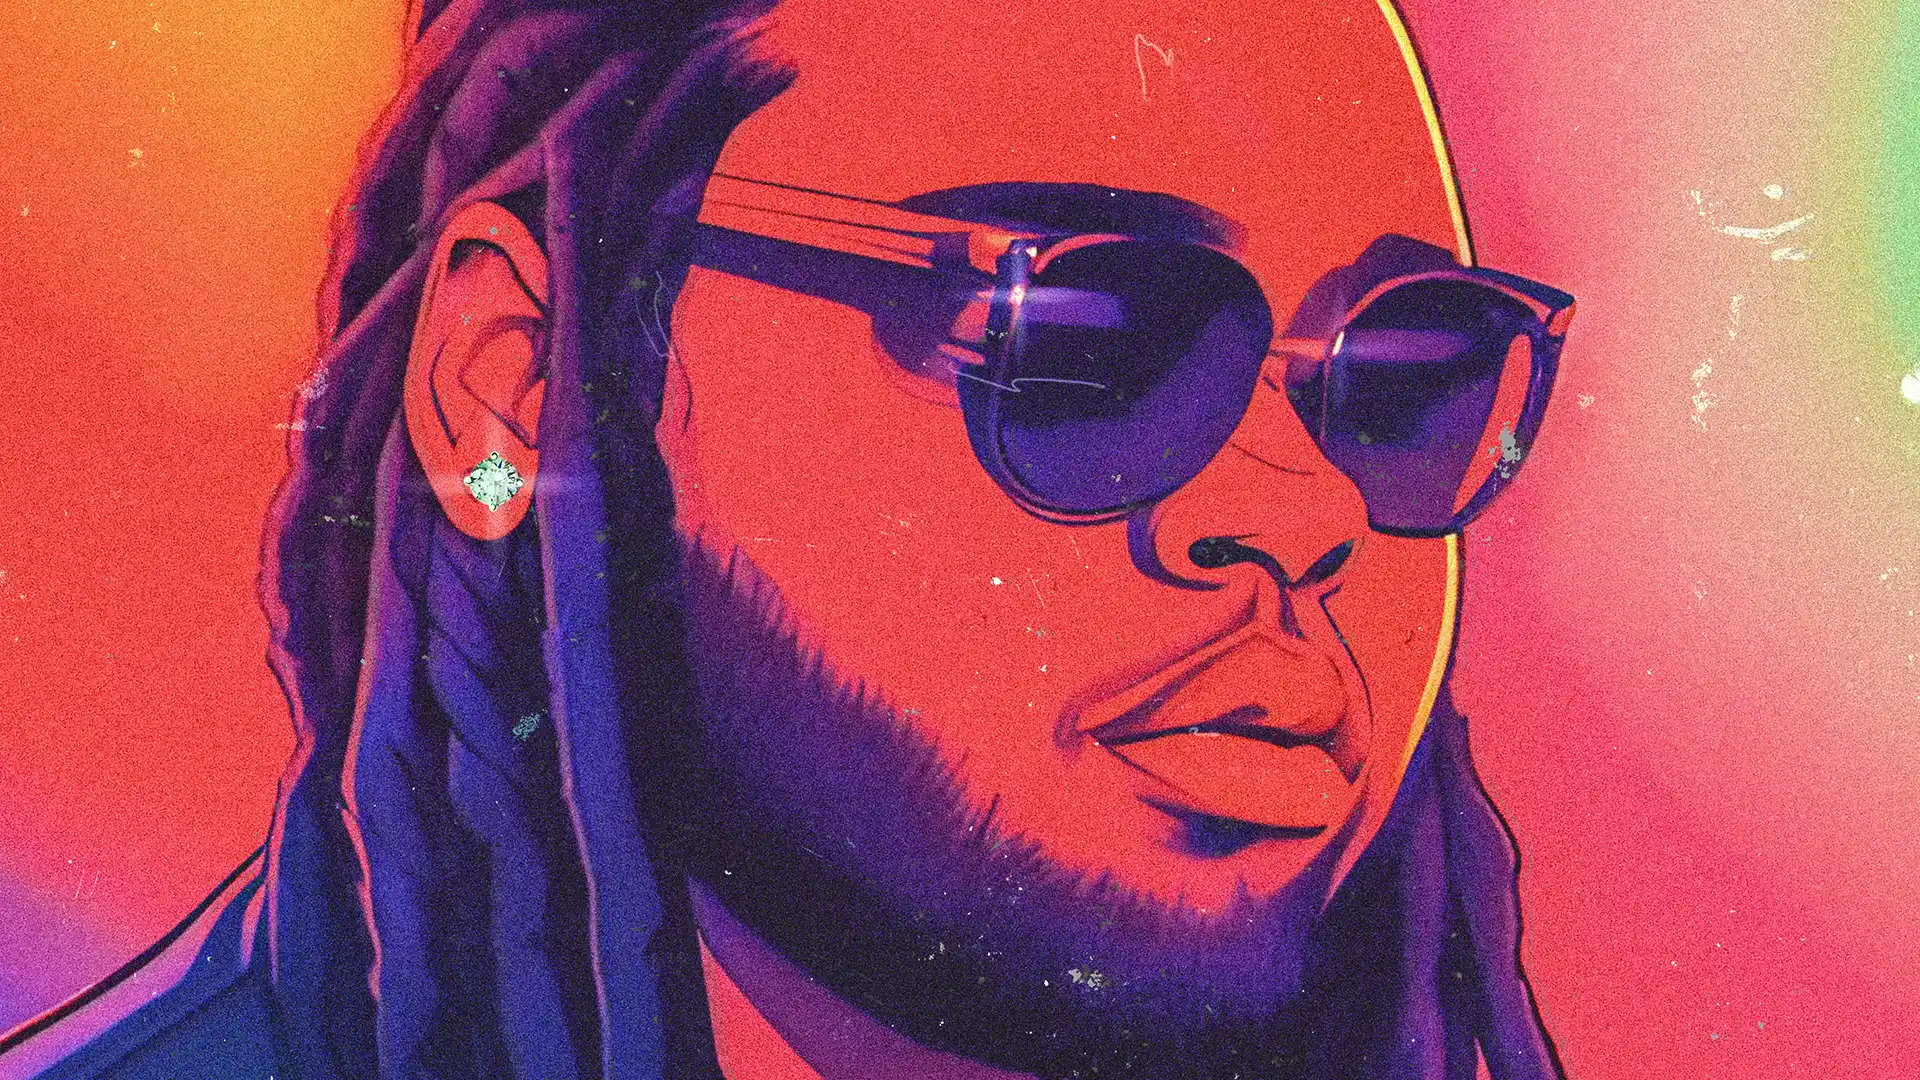 Kid Travis in vibrant sunglasses, image from the cover of his single "PRETTY EYES."